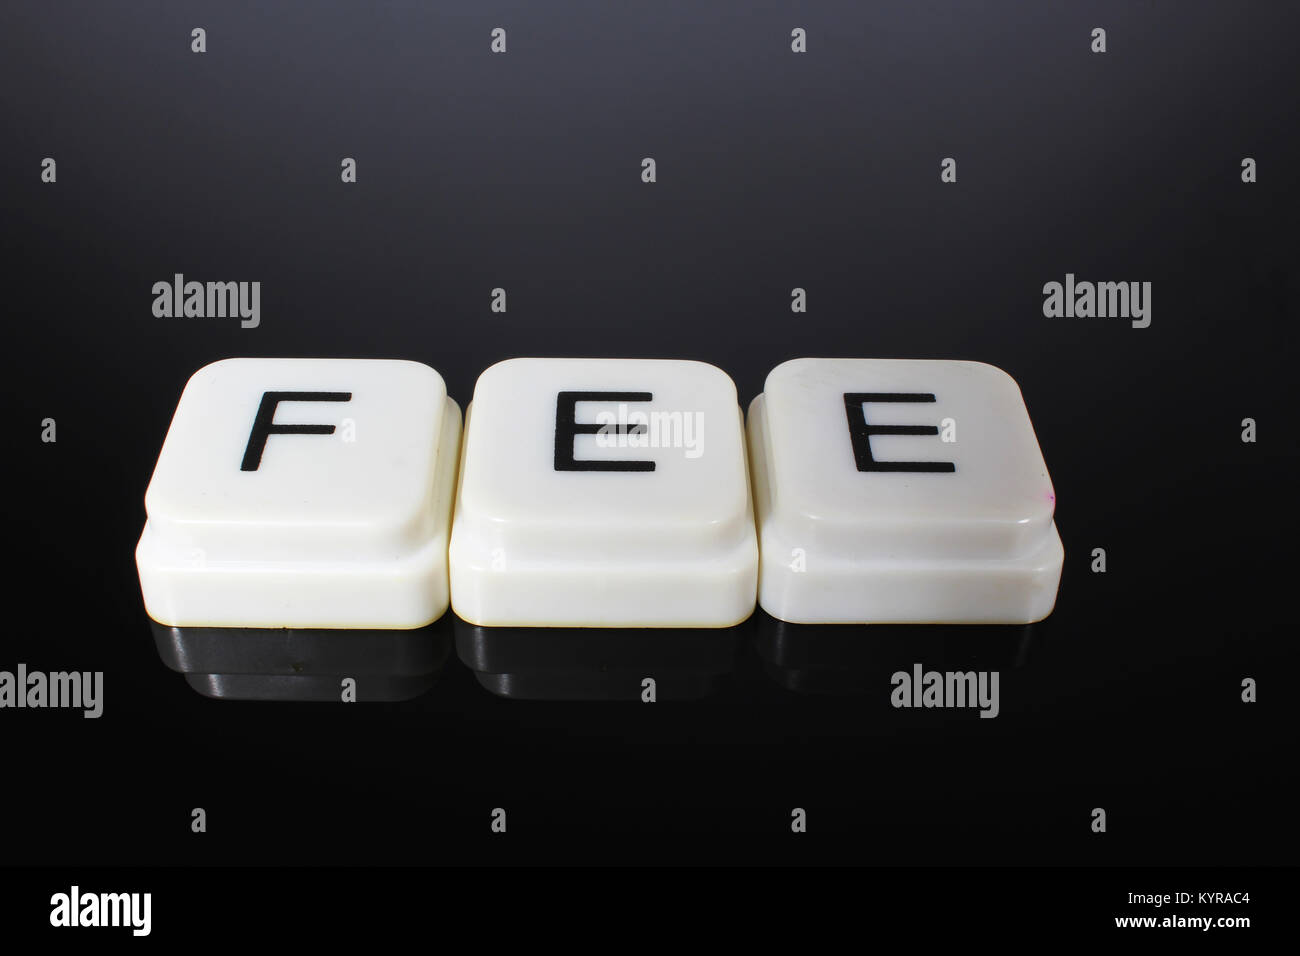 Fee text word title caption label cover backdrop background. Alphabet letter toy blocks on black reflective background. White alphabetical letters. White educational toy block with words on mirror table. Stock Photo